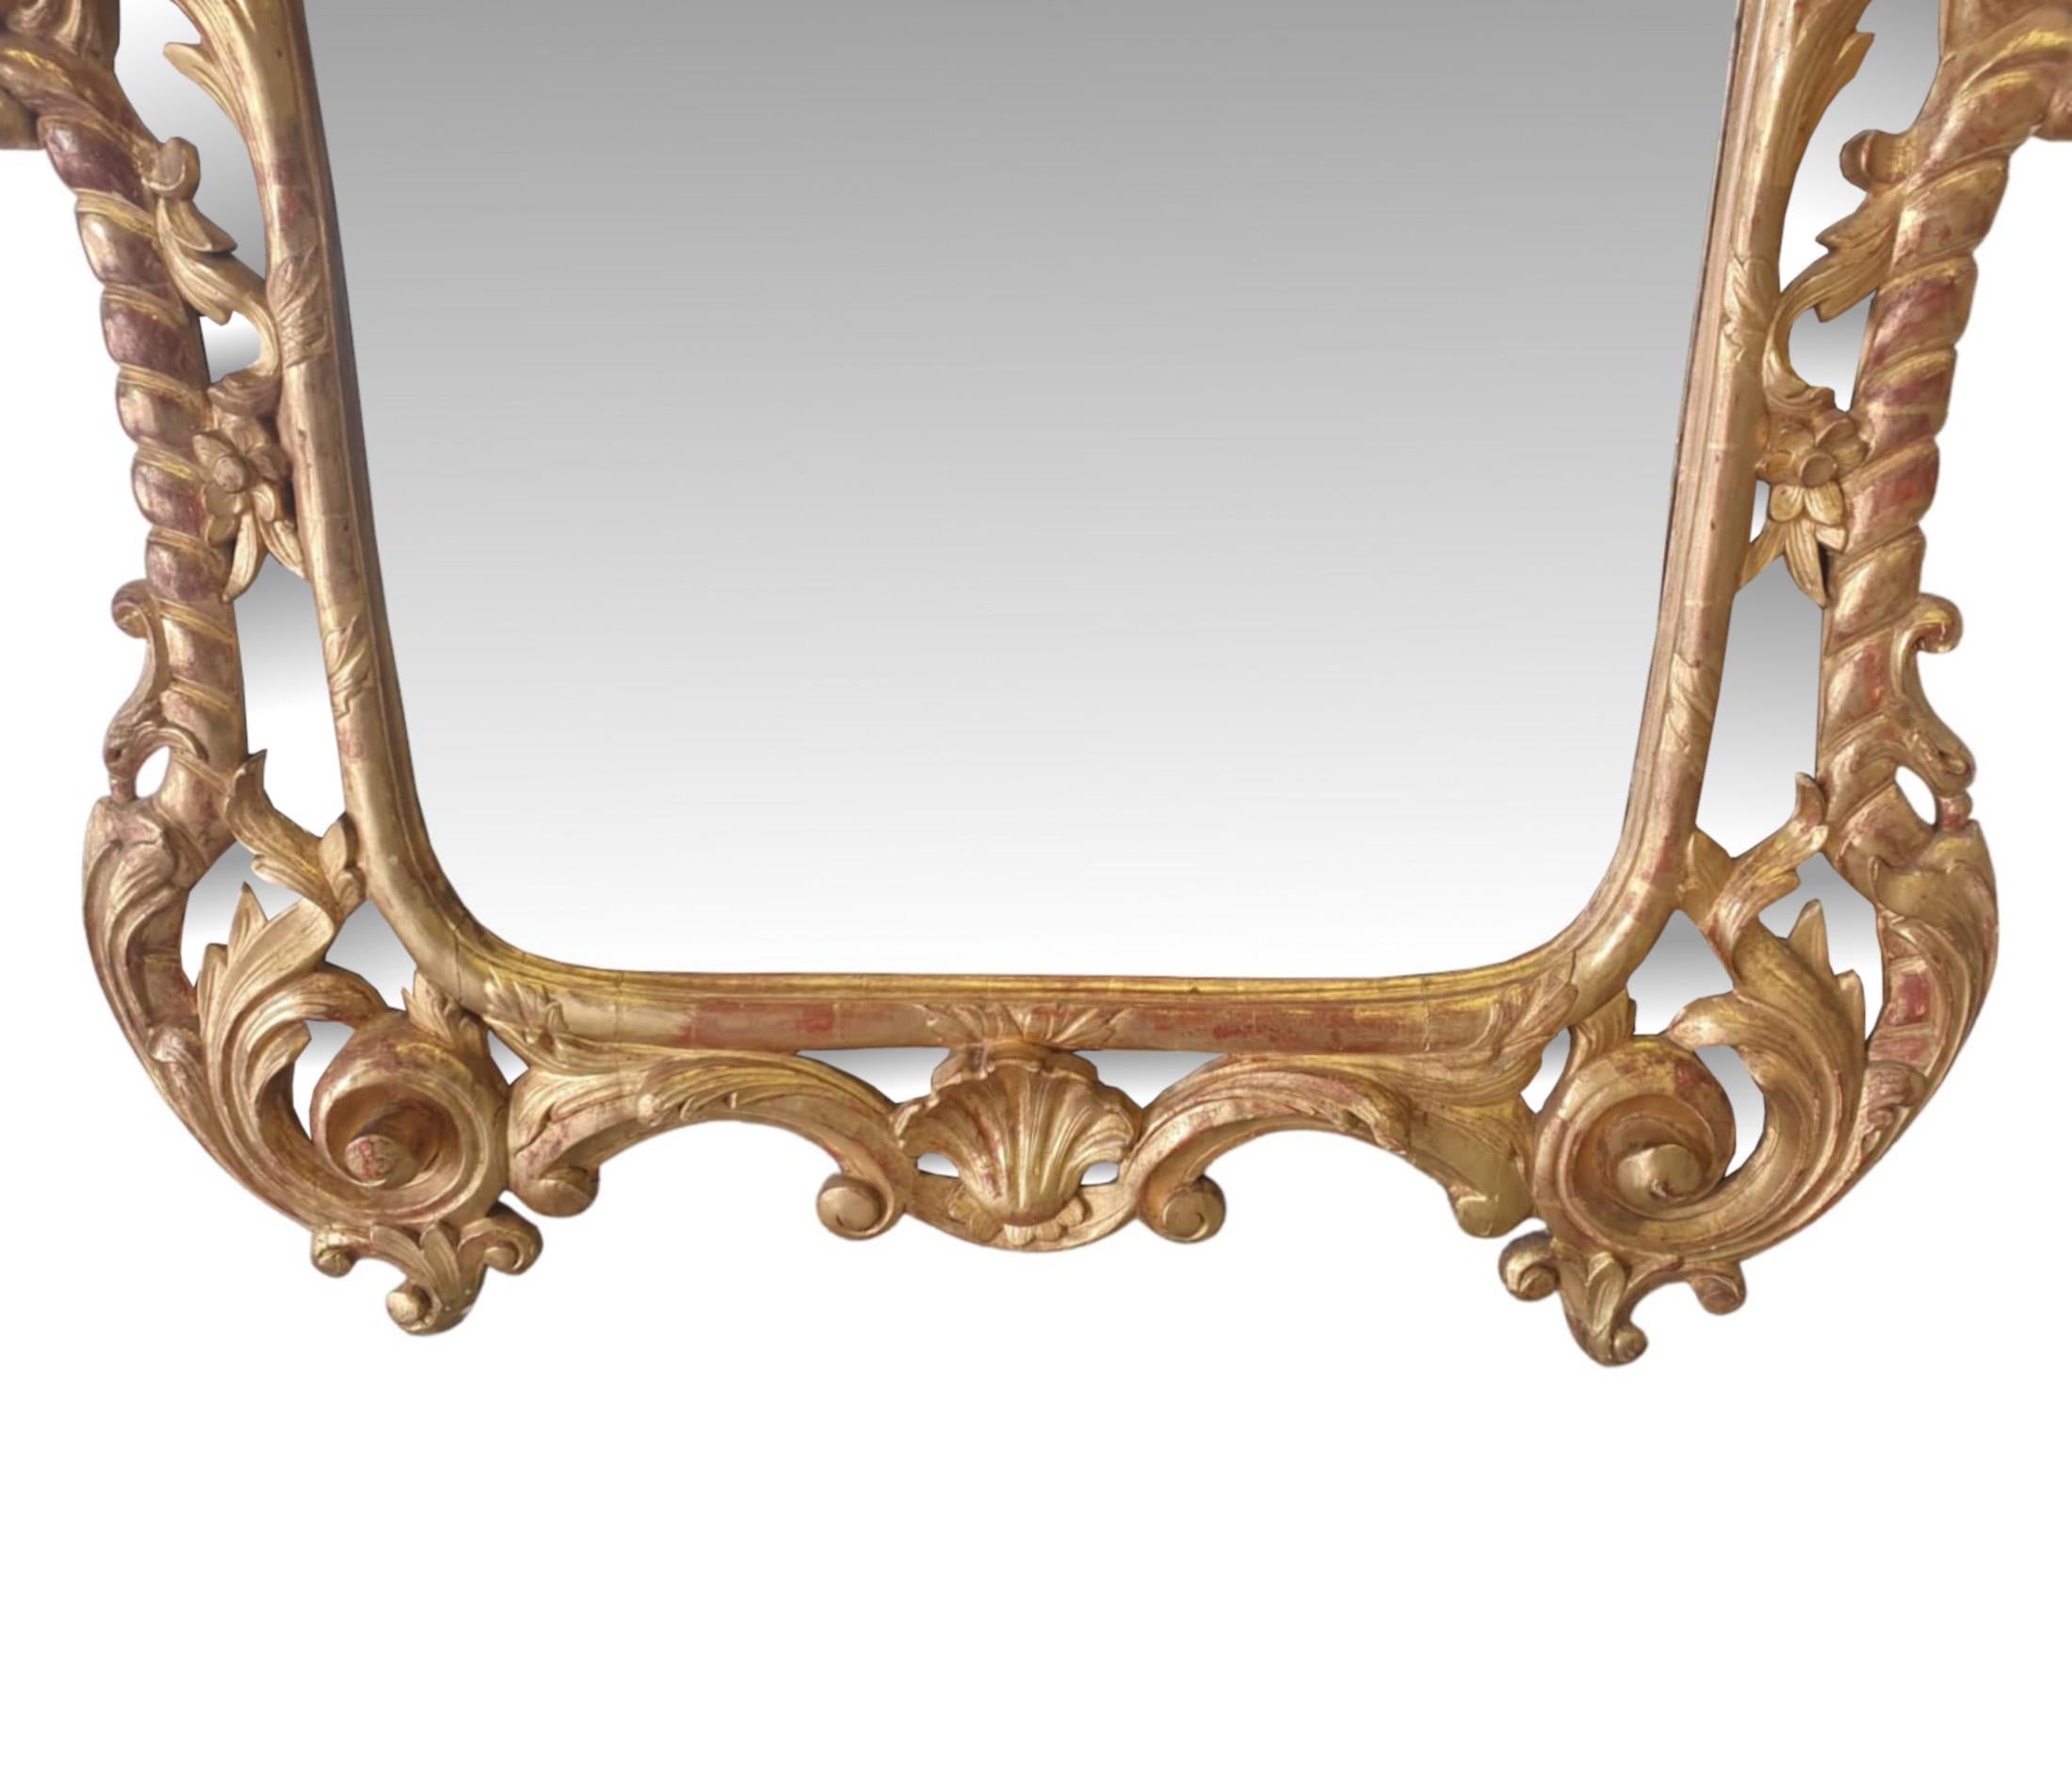 Glass Rare and Exceptional Large Early 19th Century Giltwood Overmantle Mirror For Sale